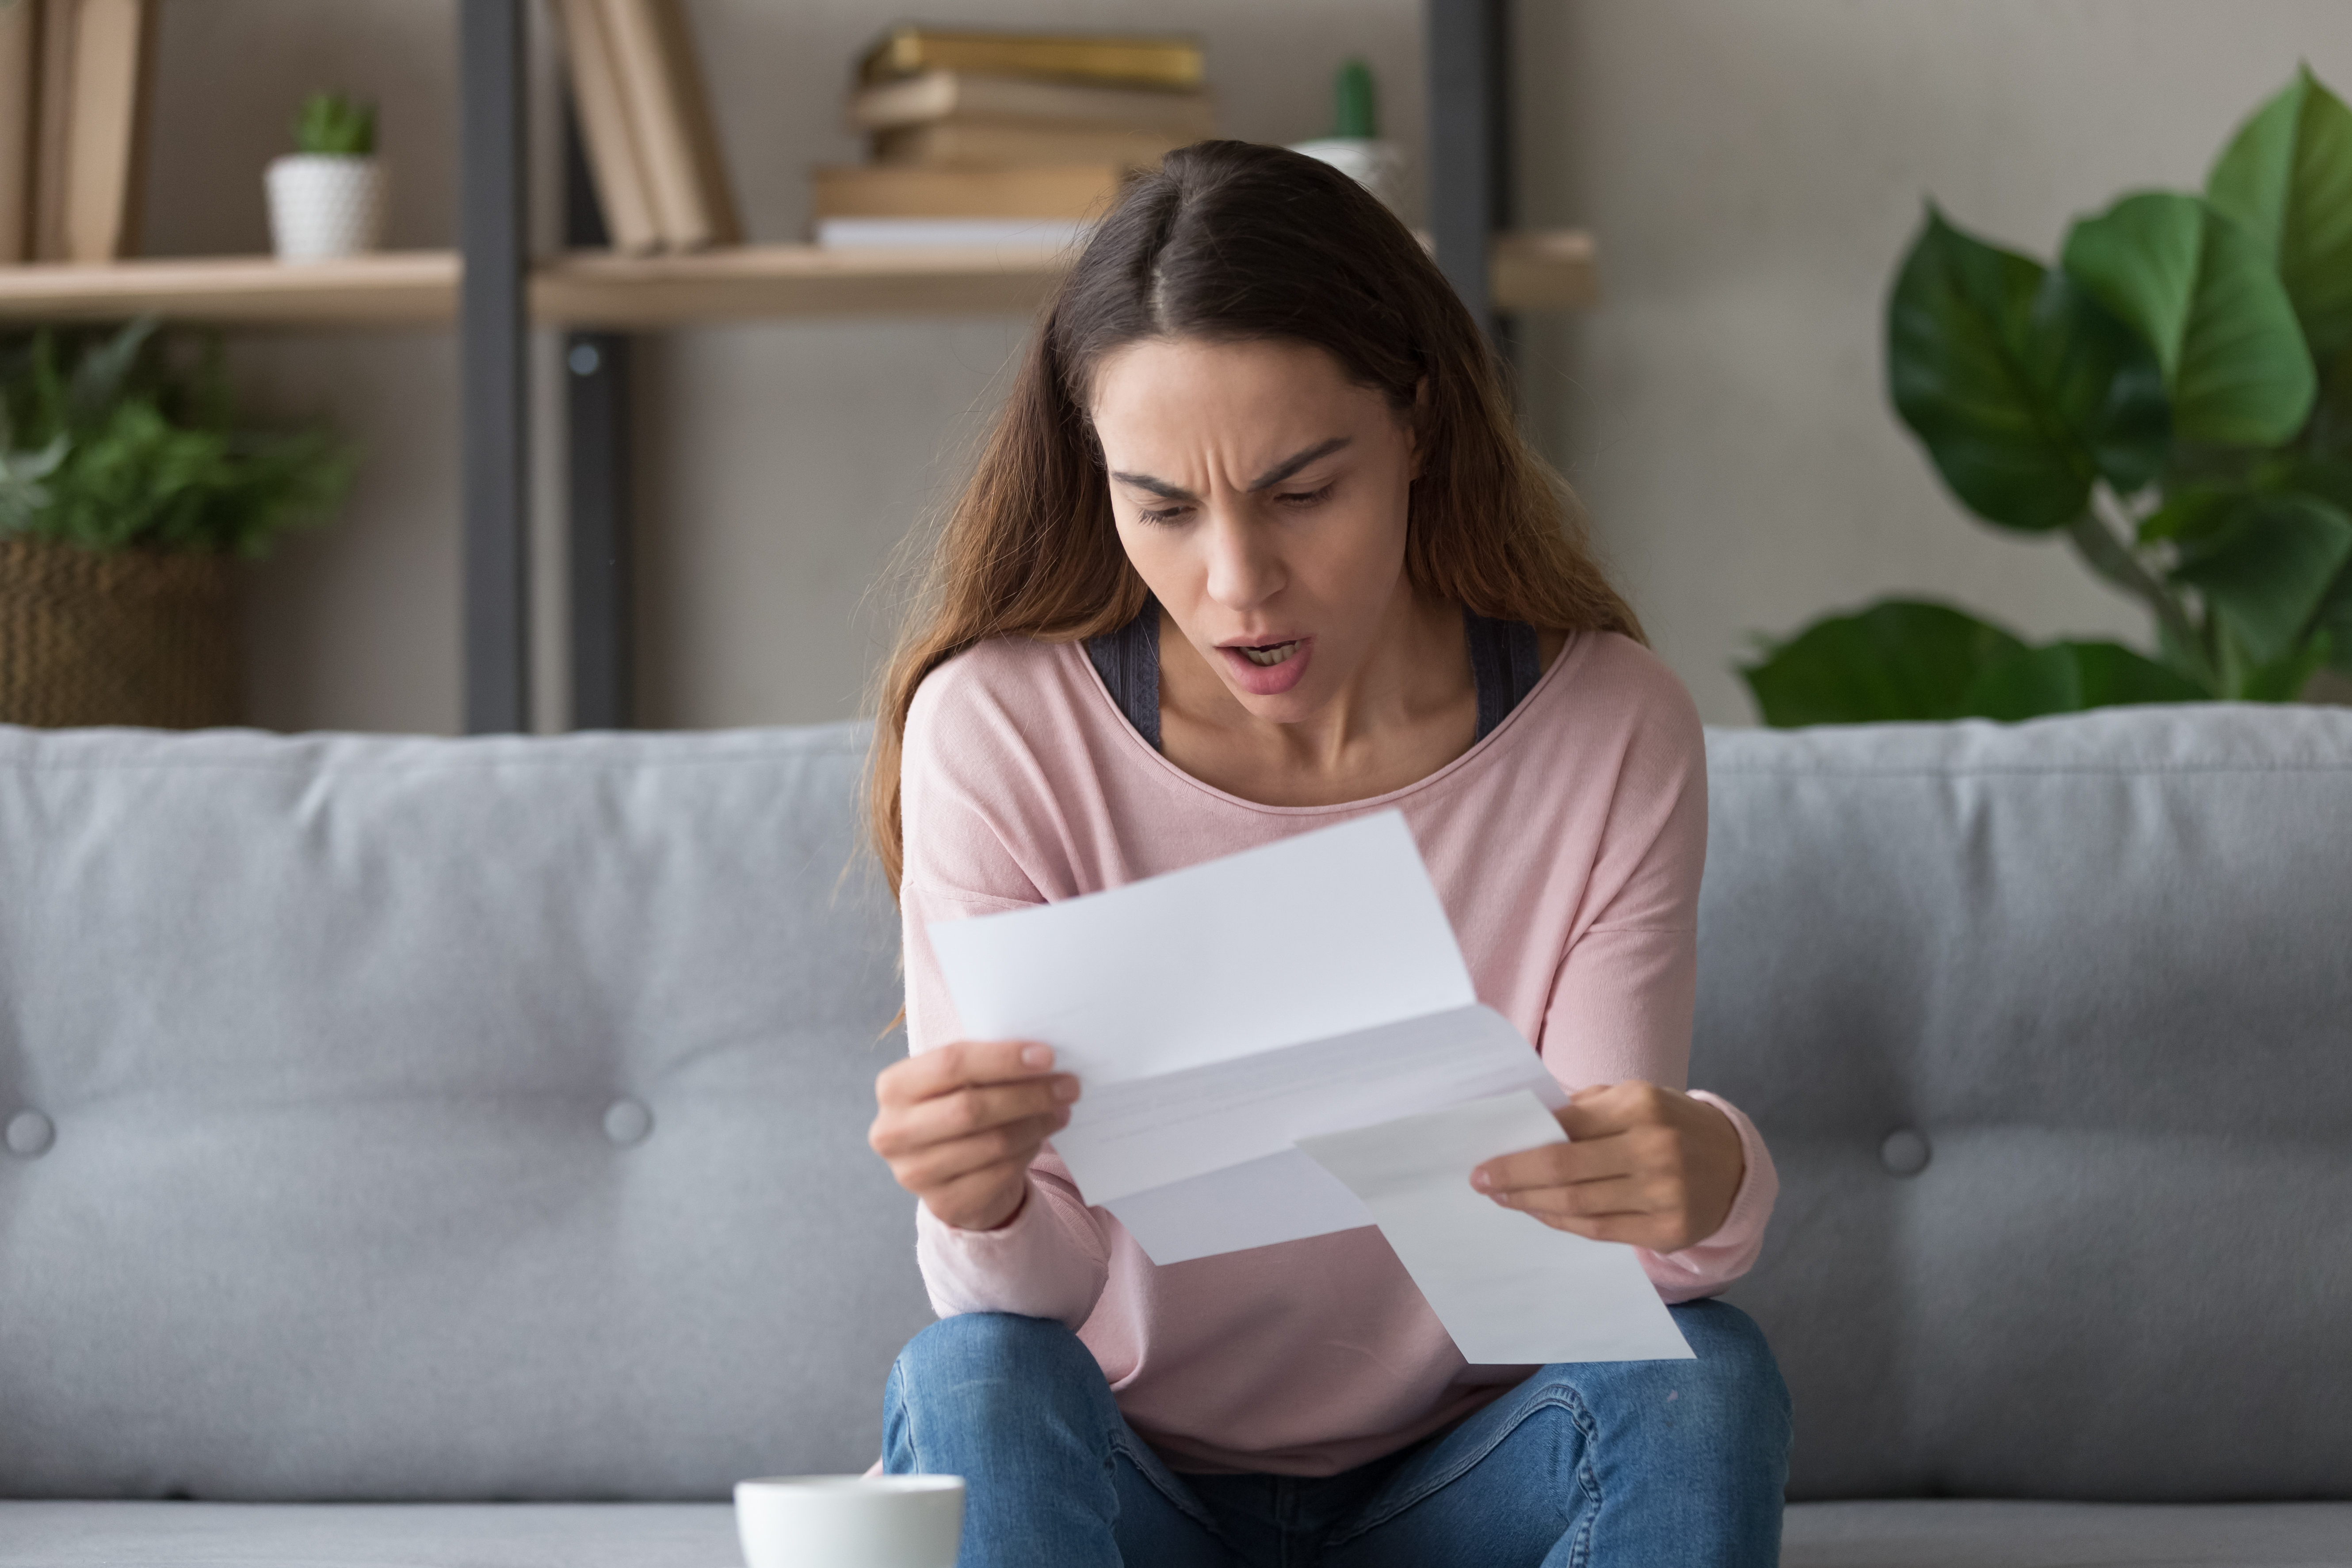 A shocked woman reading a letter while seated | Source: Shutterstock